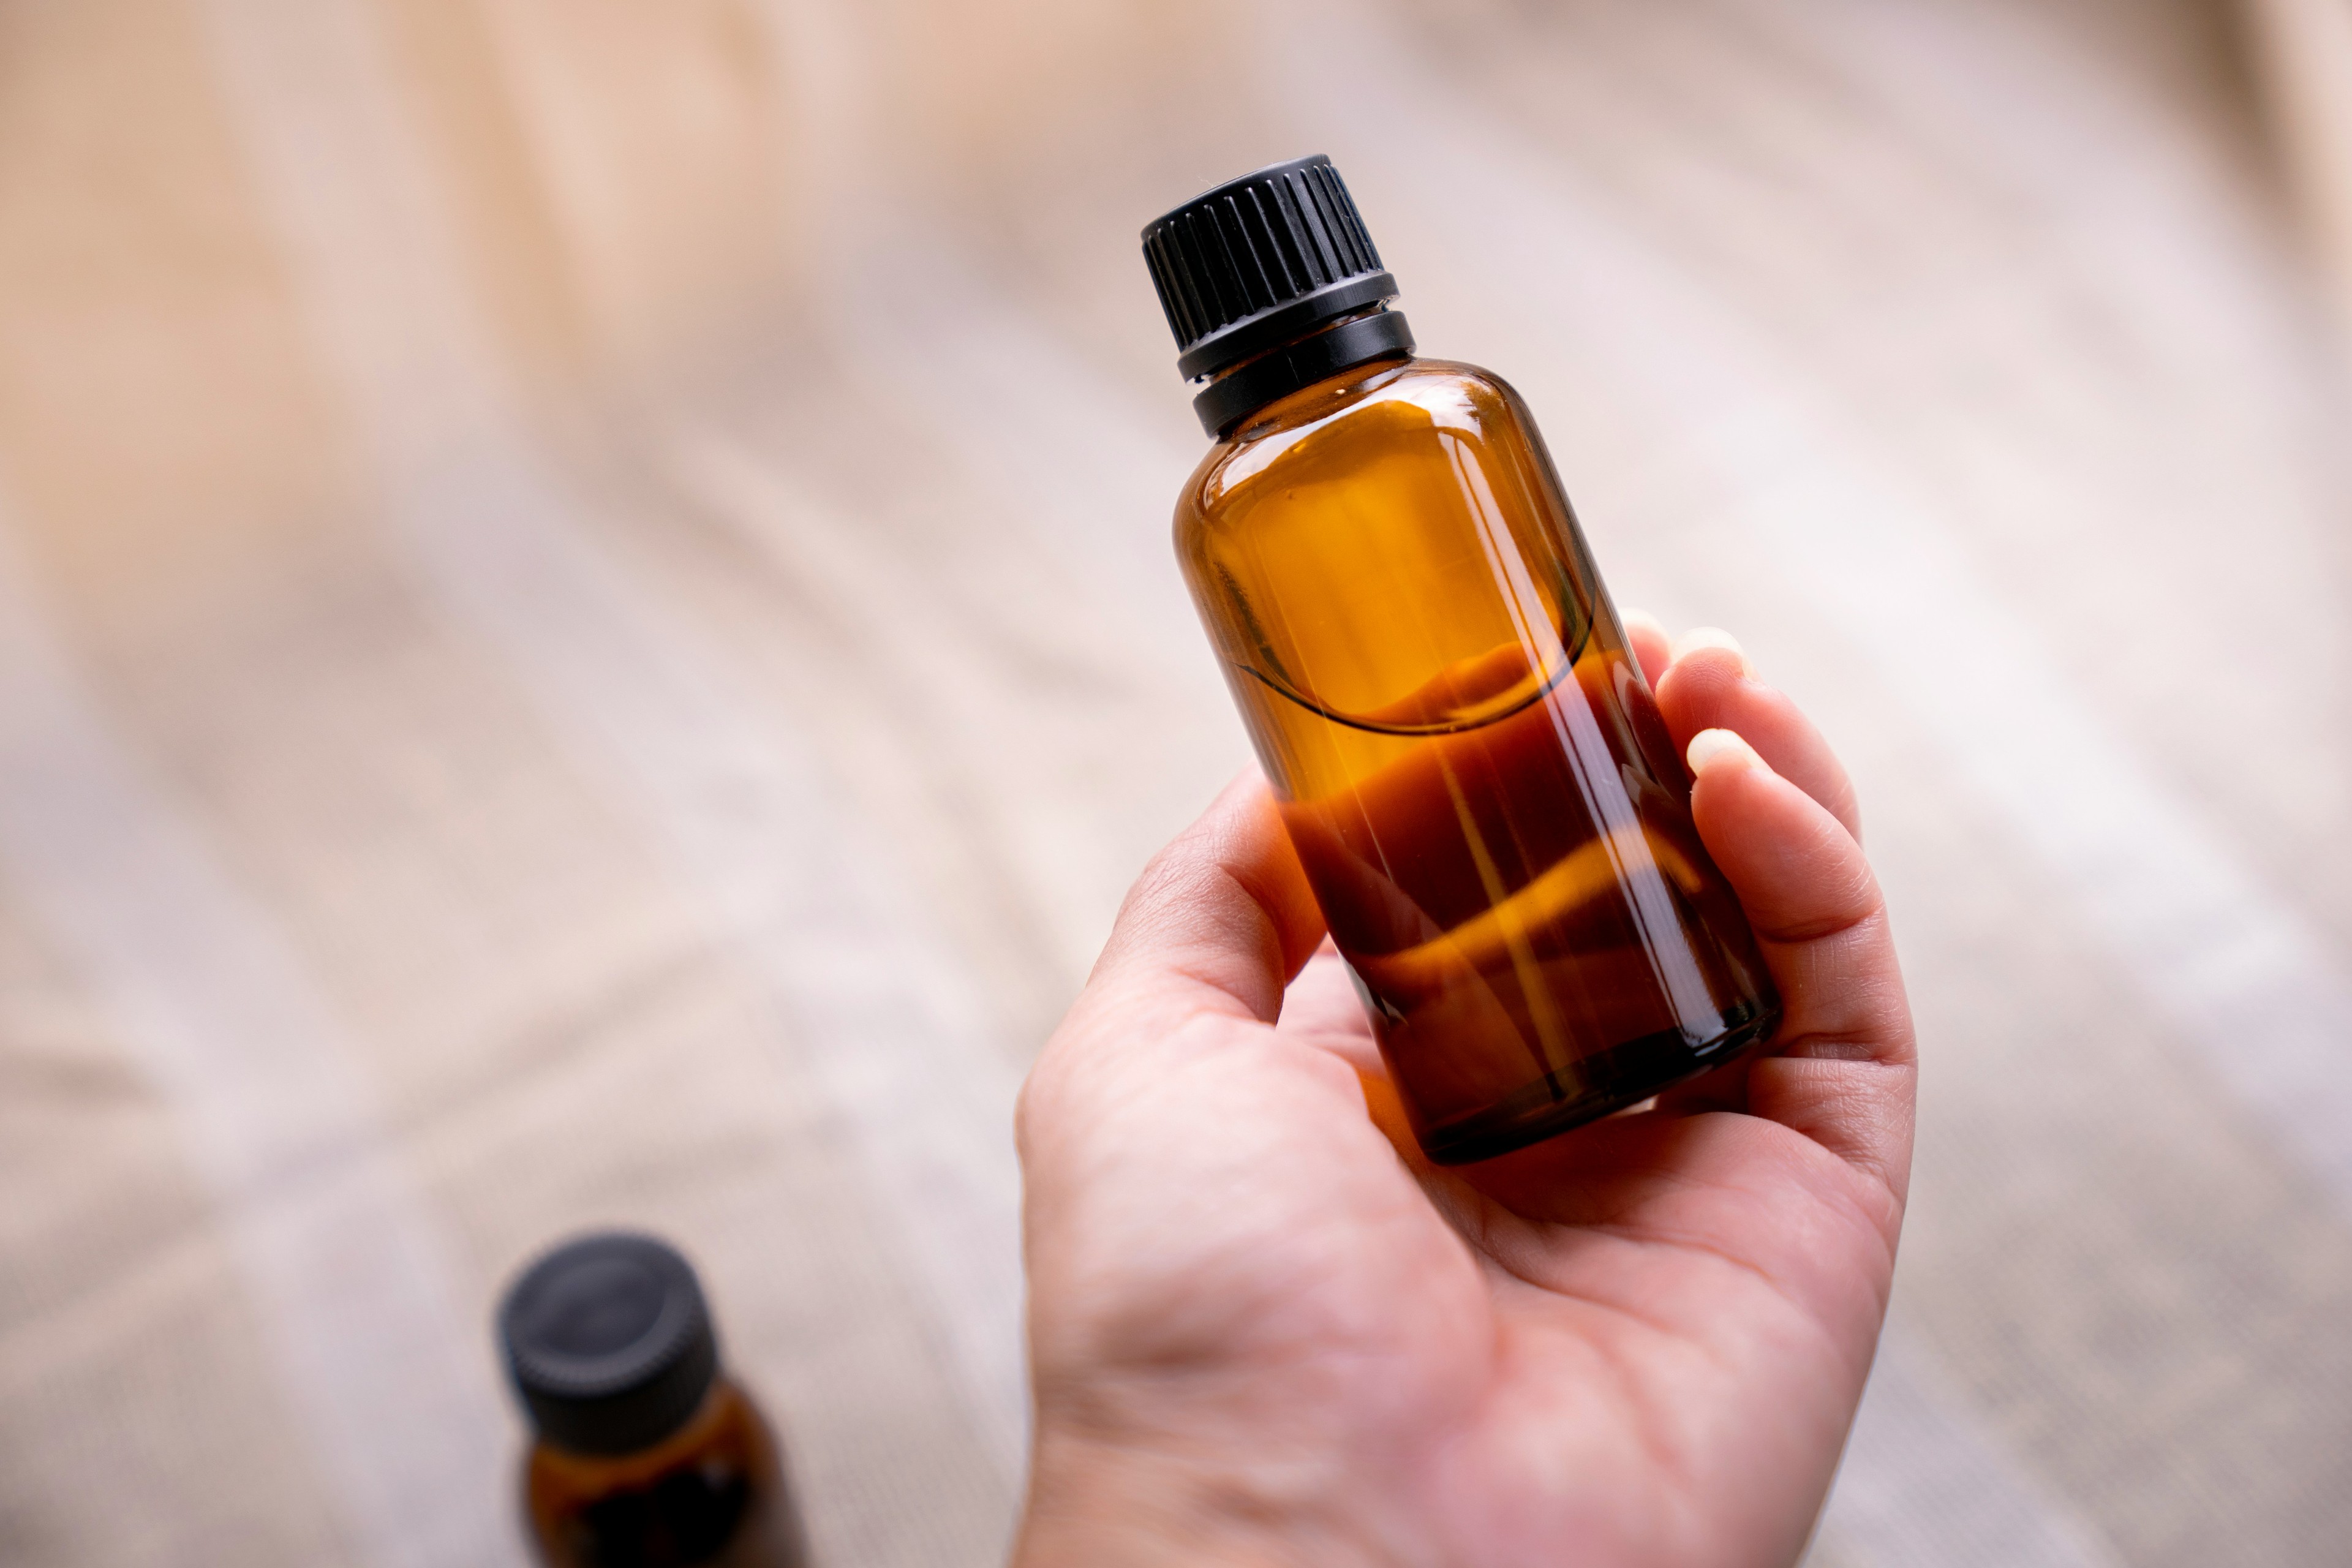 The Complete Guide to Different Types of Musk Oils